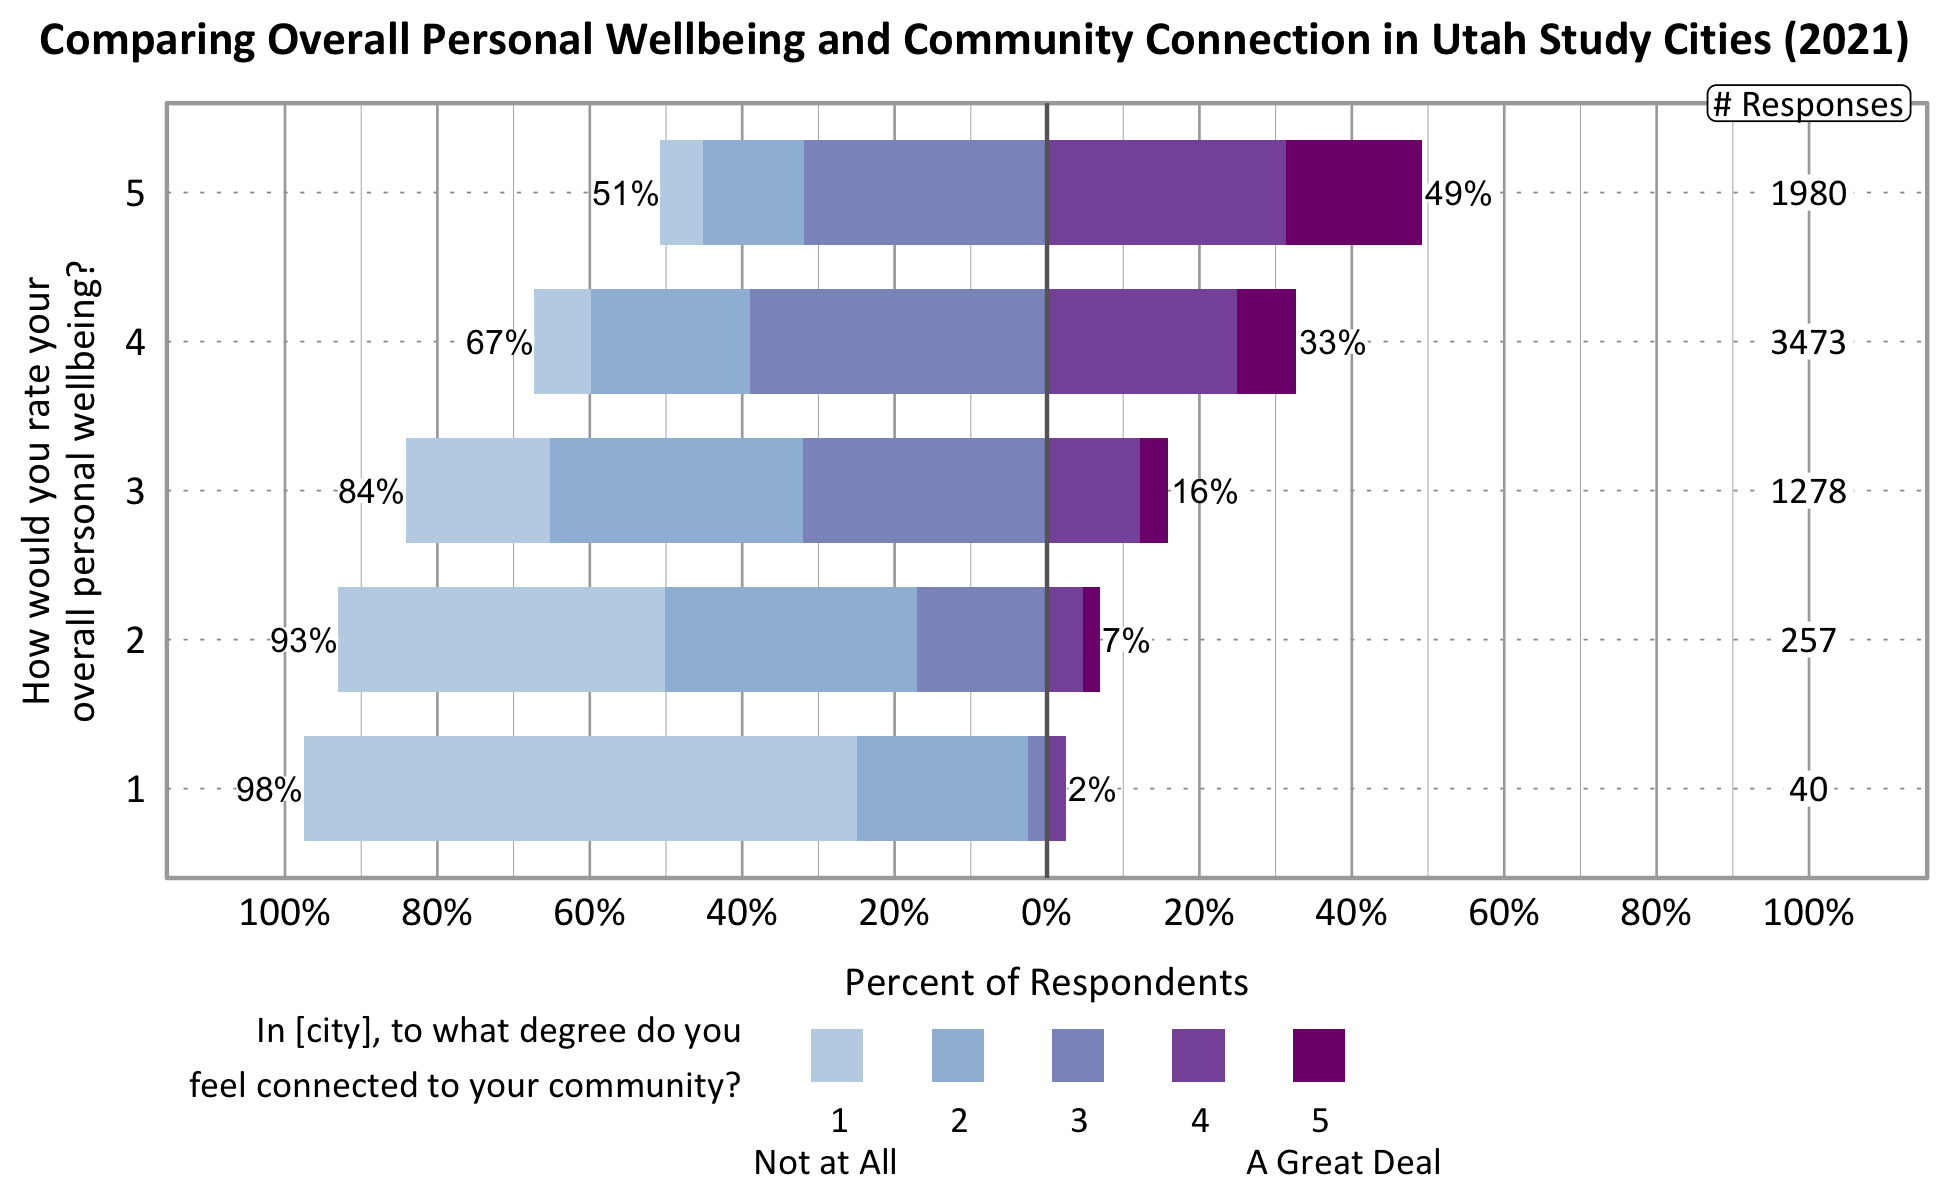 Type: Likert Graph. Title: Comparing Overall Personal Wellbeing and Community Connection in Utah Study Cities (2021). Of the 40 respondents that rate their overall personal wellbeing as a 1, 98% indicate a community connection score of 1, 2, or 3 while 2% indicate a community connection score of 4 or 5. Of the 257 respondents that rate their overall personal wellbeing as a 2, 93% indicate a community connection score of 1, 2, or 3 while 7% indicate a community connection score of 4 or 5. Of the 1278 respondents that rate their overall personal wellbeing as a 3, 84% indicate a community connection score of 1, 2, or 3 while 16% indicate a community connection score of 4 or 5. Of the 3473 participants that rate their overall wellbeing as a 4, 67% indicate a community connection score of 1, 2, or 3 while 33% indicate a community connection score of 4 or 5. Of the 1980 respondents that rate their overall personal wellbeing as a 5, 51% indicated a community connection score of 1, 2, or 3 while 49% indicate a community connection score of 4 or 5. 